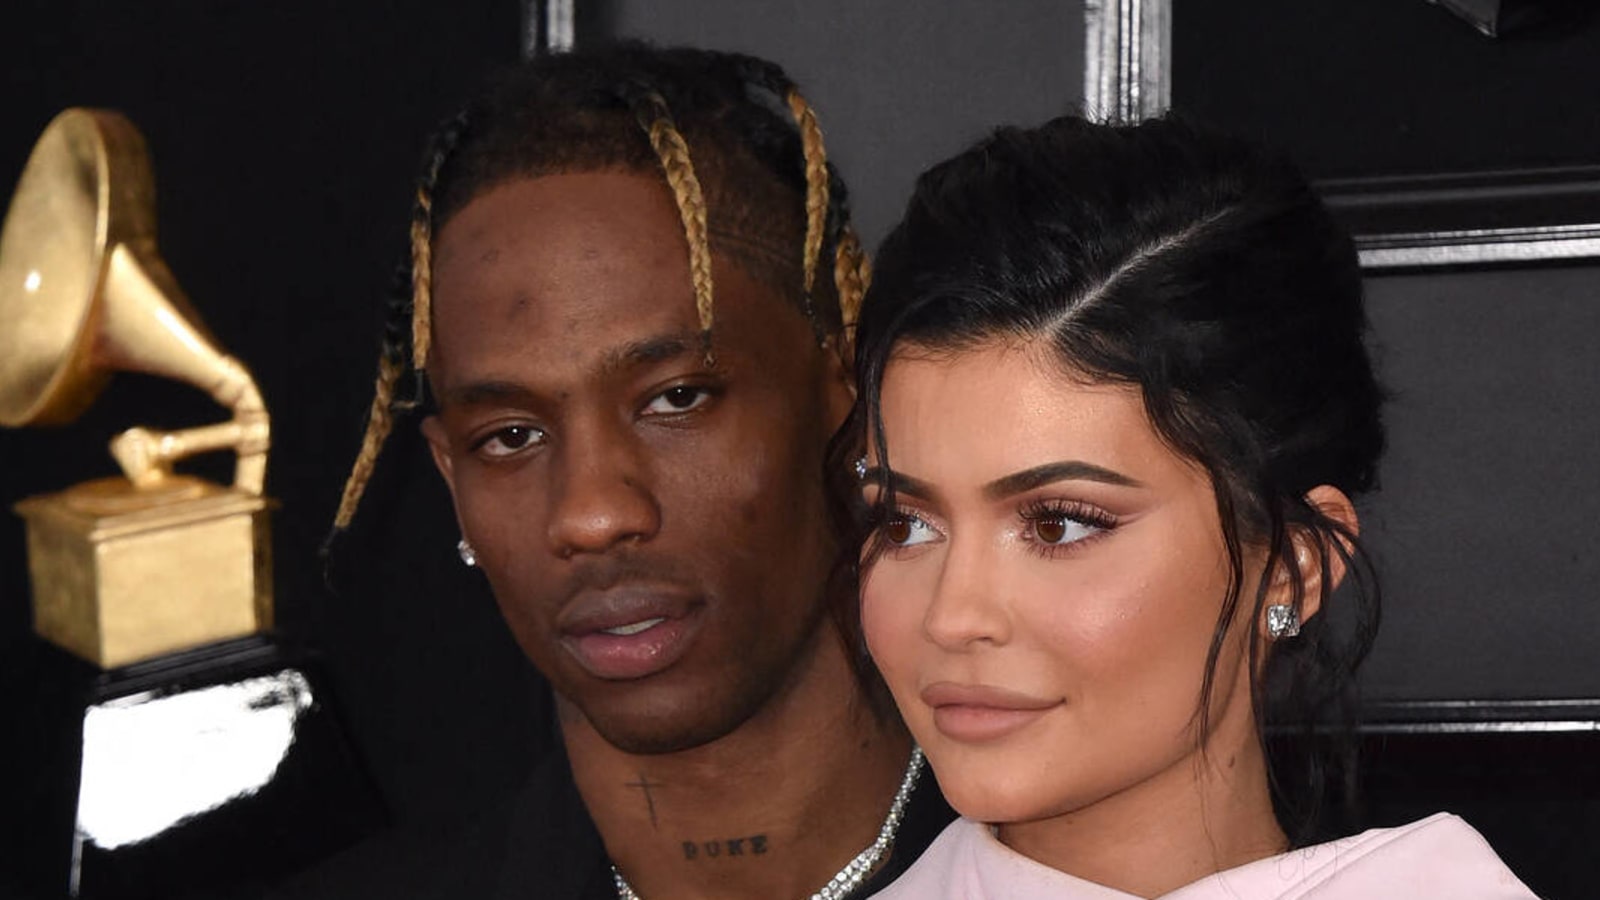 Kylie Jenner announces birth of son with Travis Scott